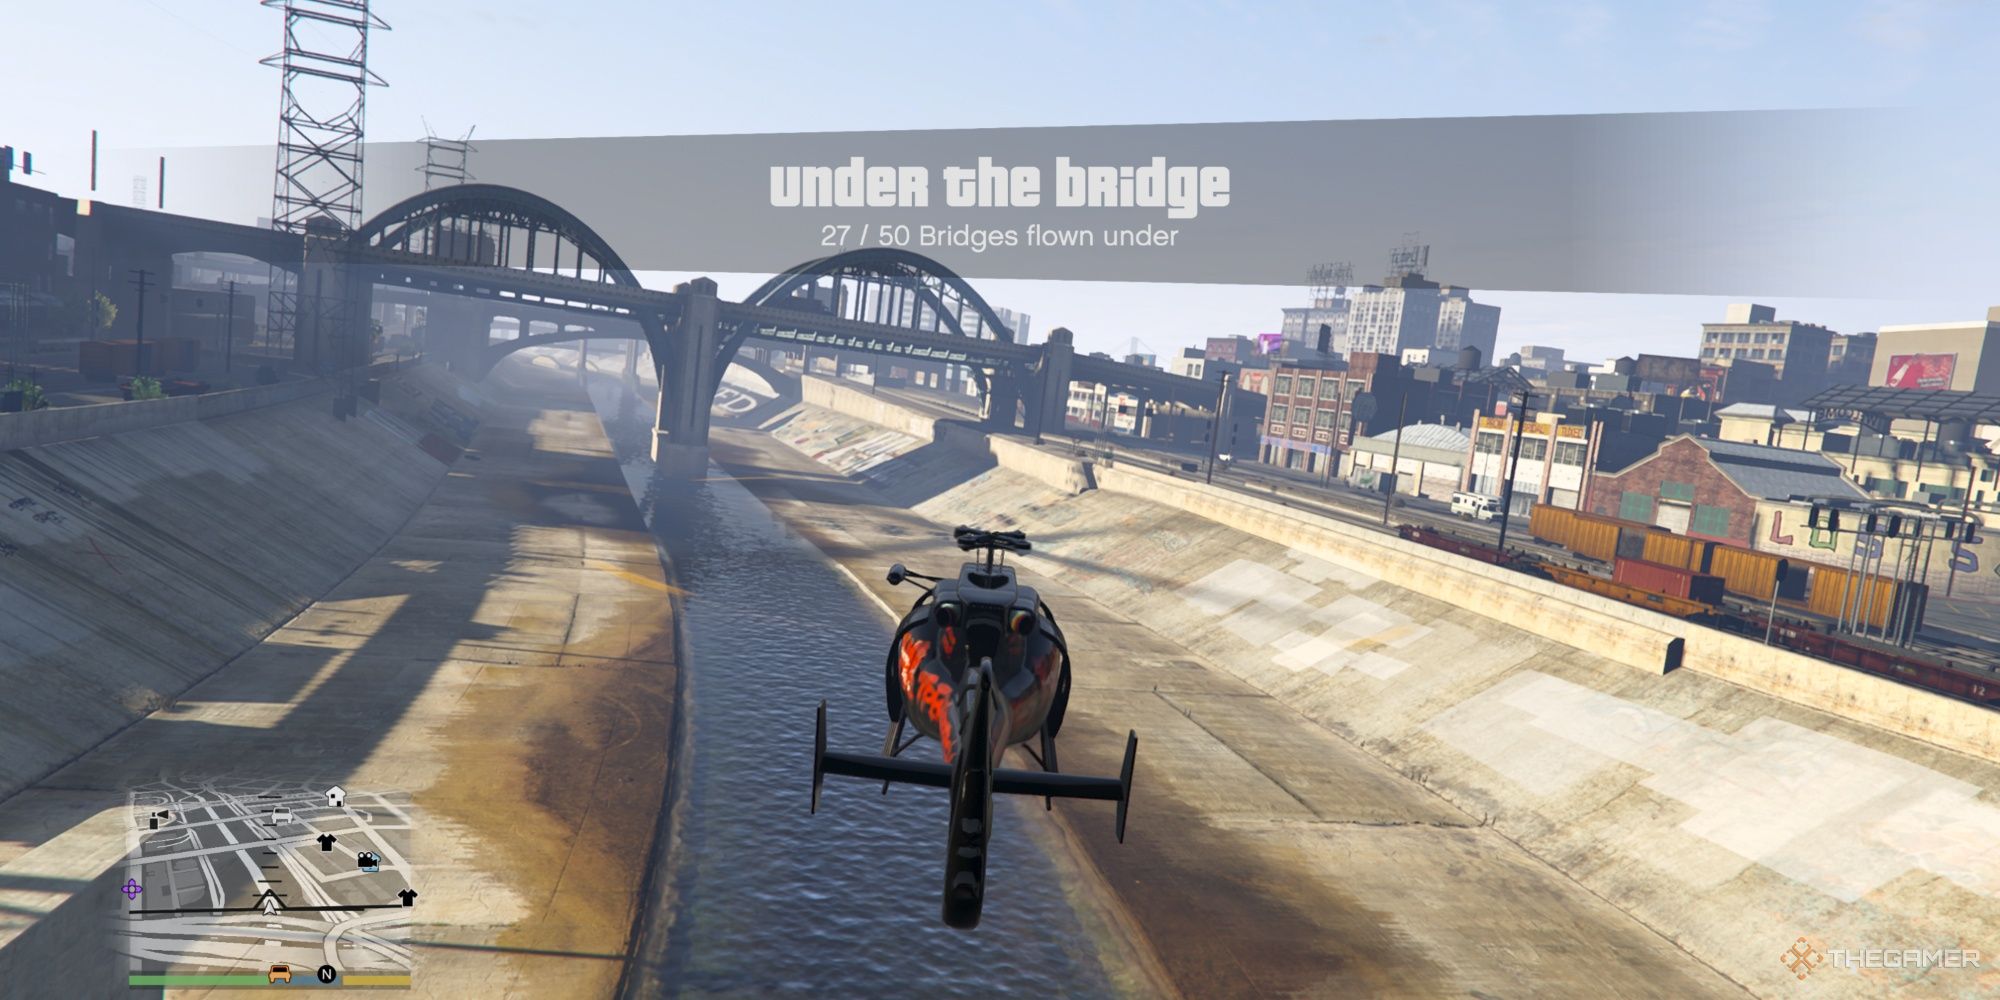 Completing a Under the Bridge challenge in GTA5